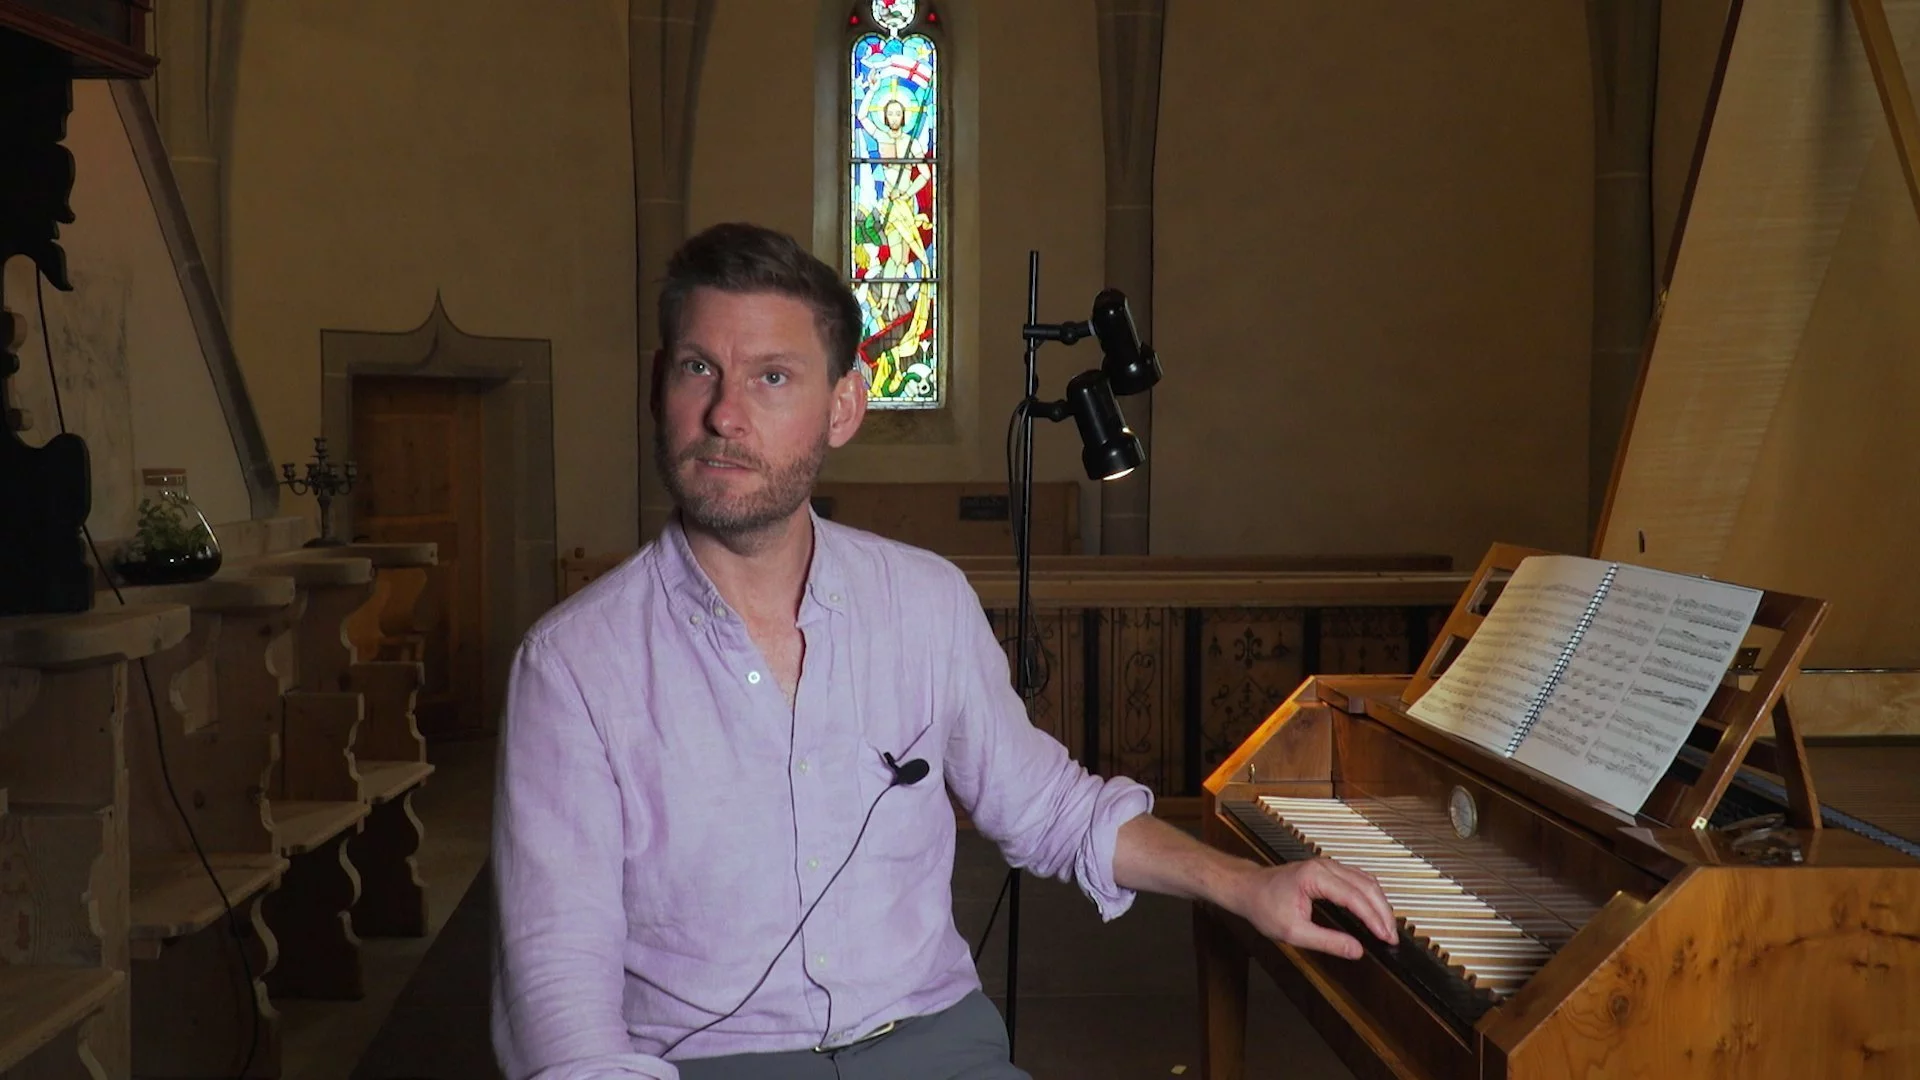 Kristian Bezuidenhout talks about the Fortepiano